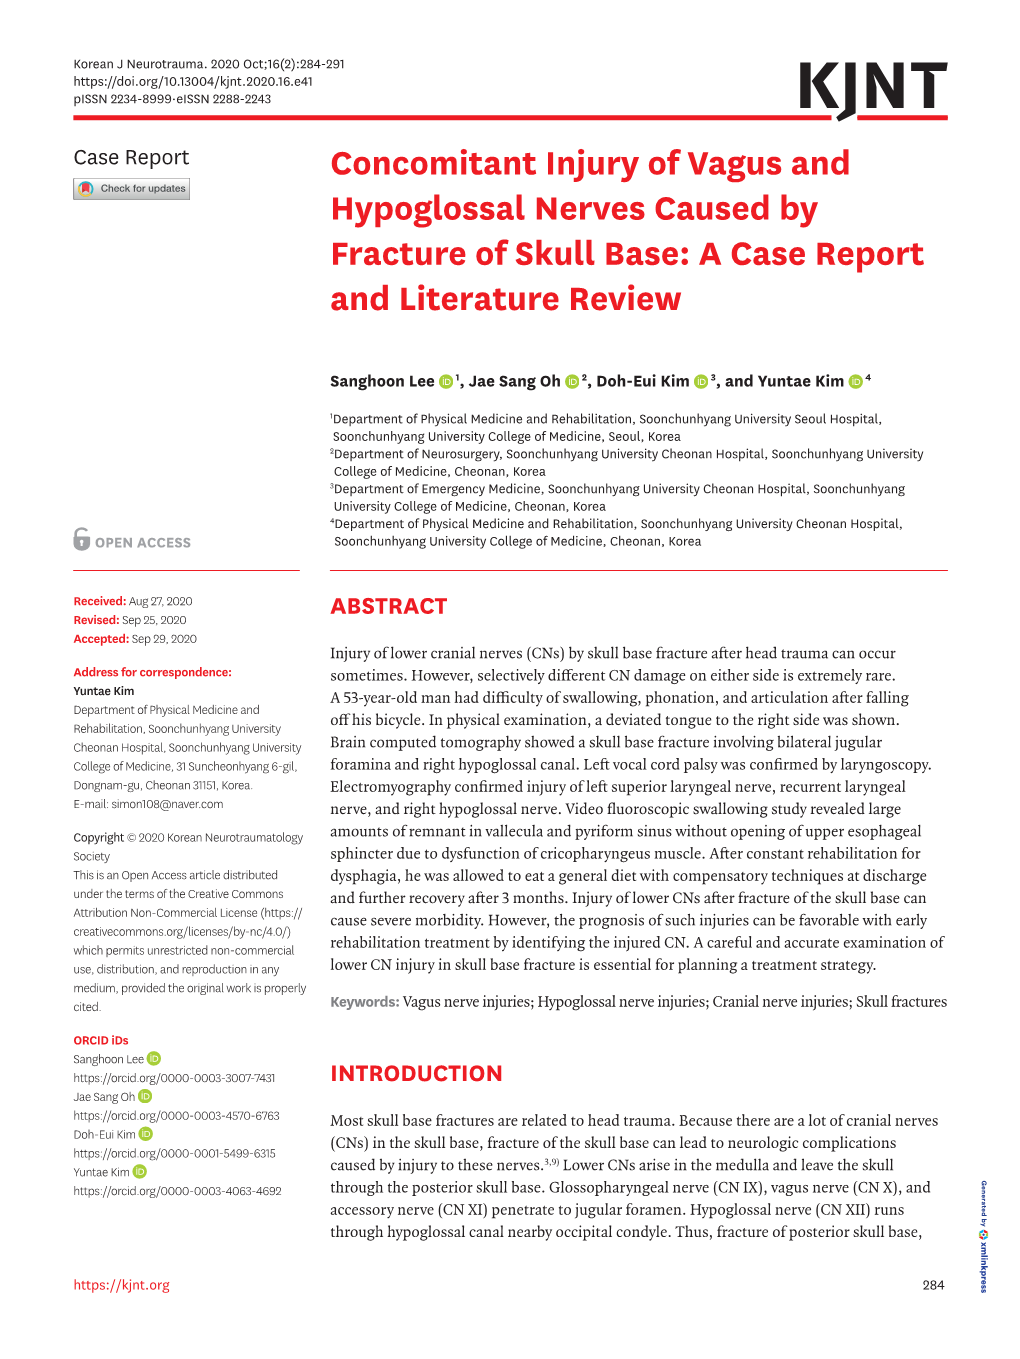 Concomitant Injury of Vagus and Hypoglossal Nerves Caused by Fracture of Skull Base: a Case Report and Literature Review